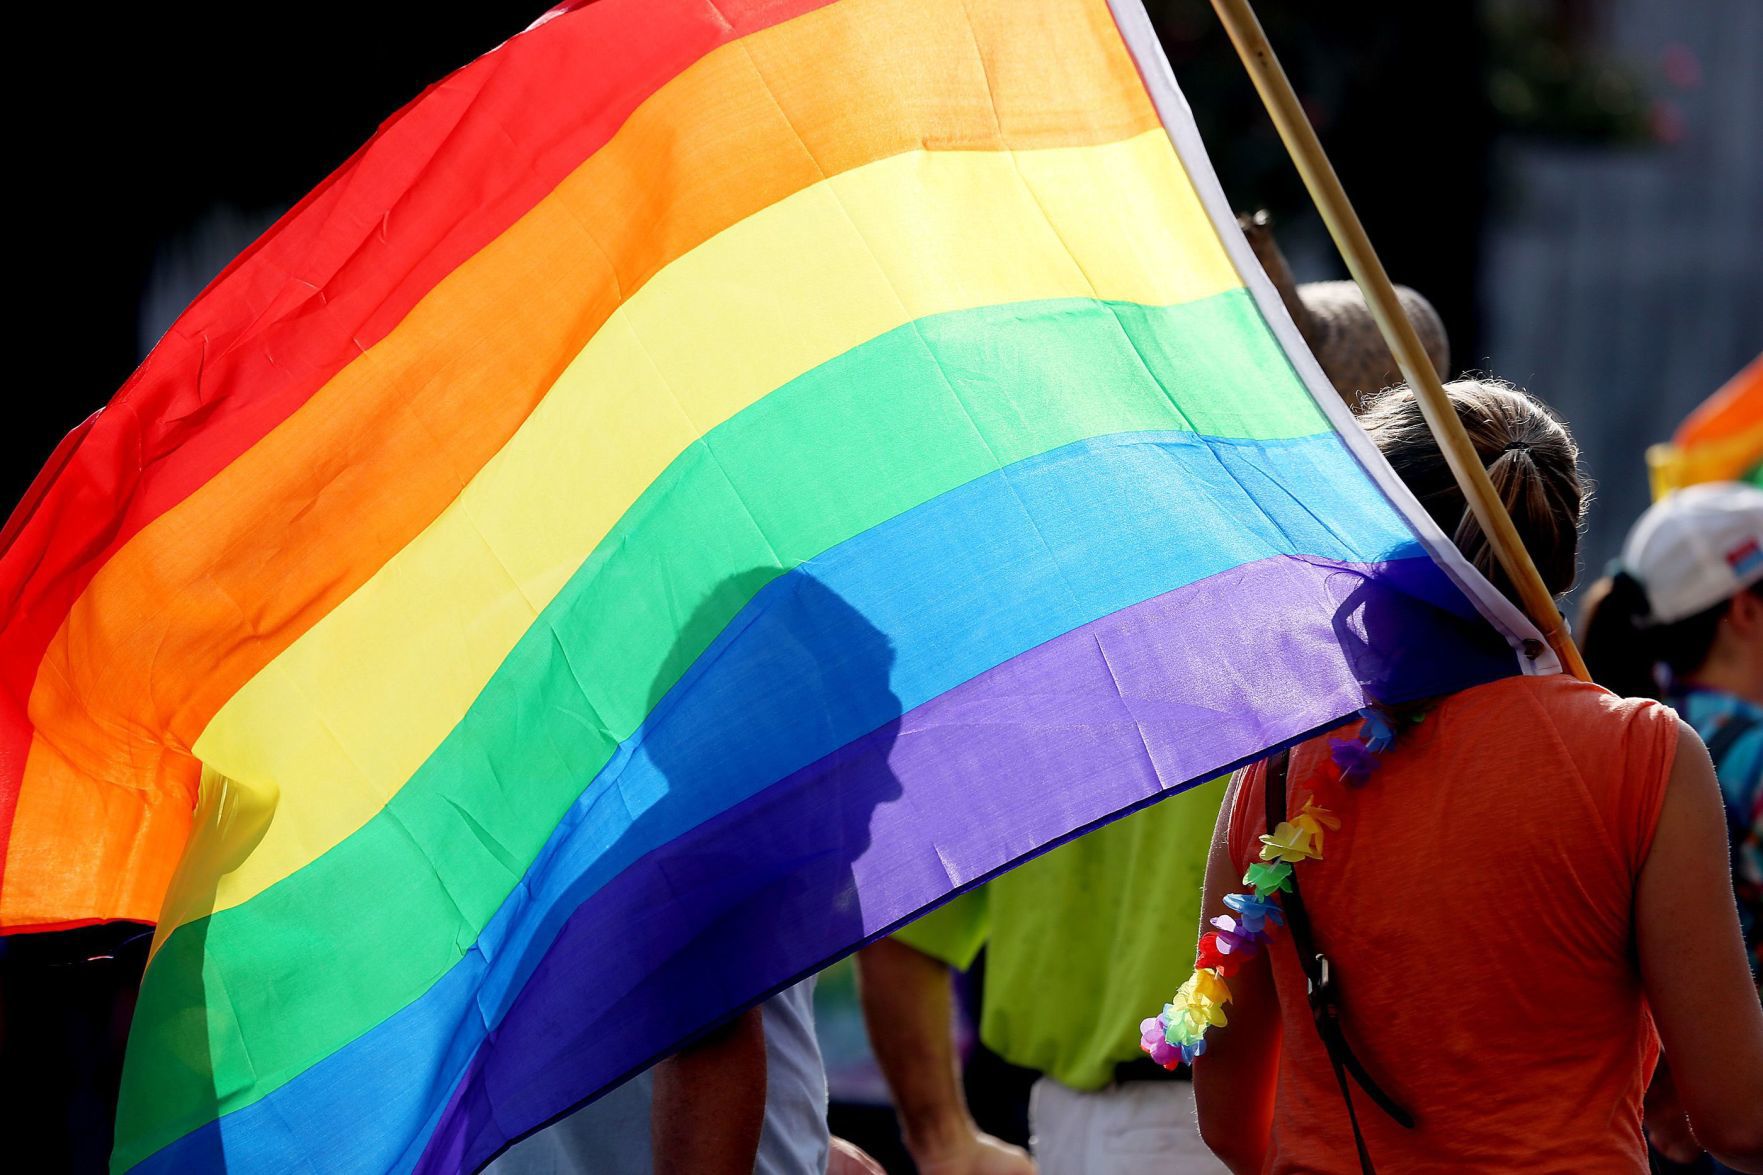 man charged for burning gay pride flag